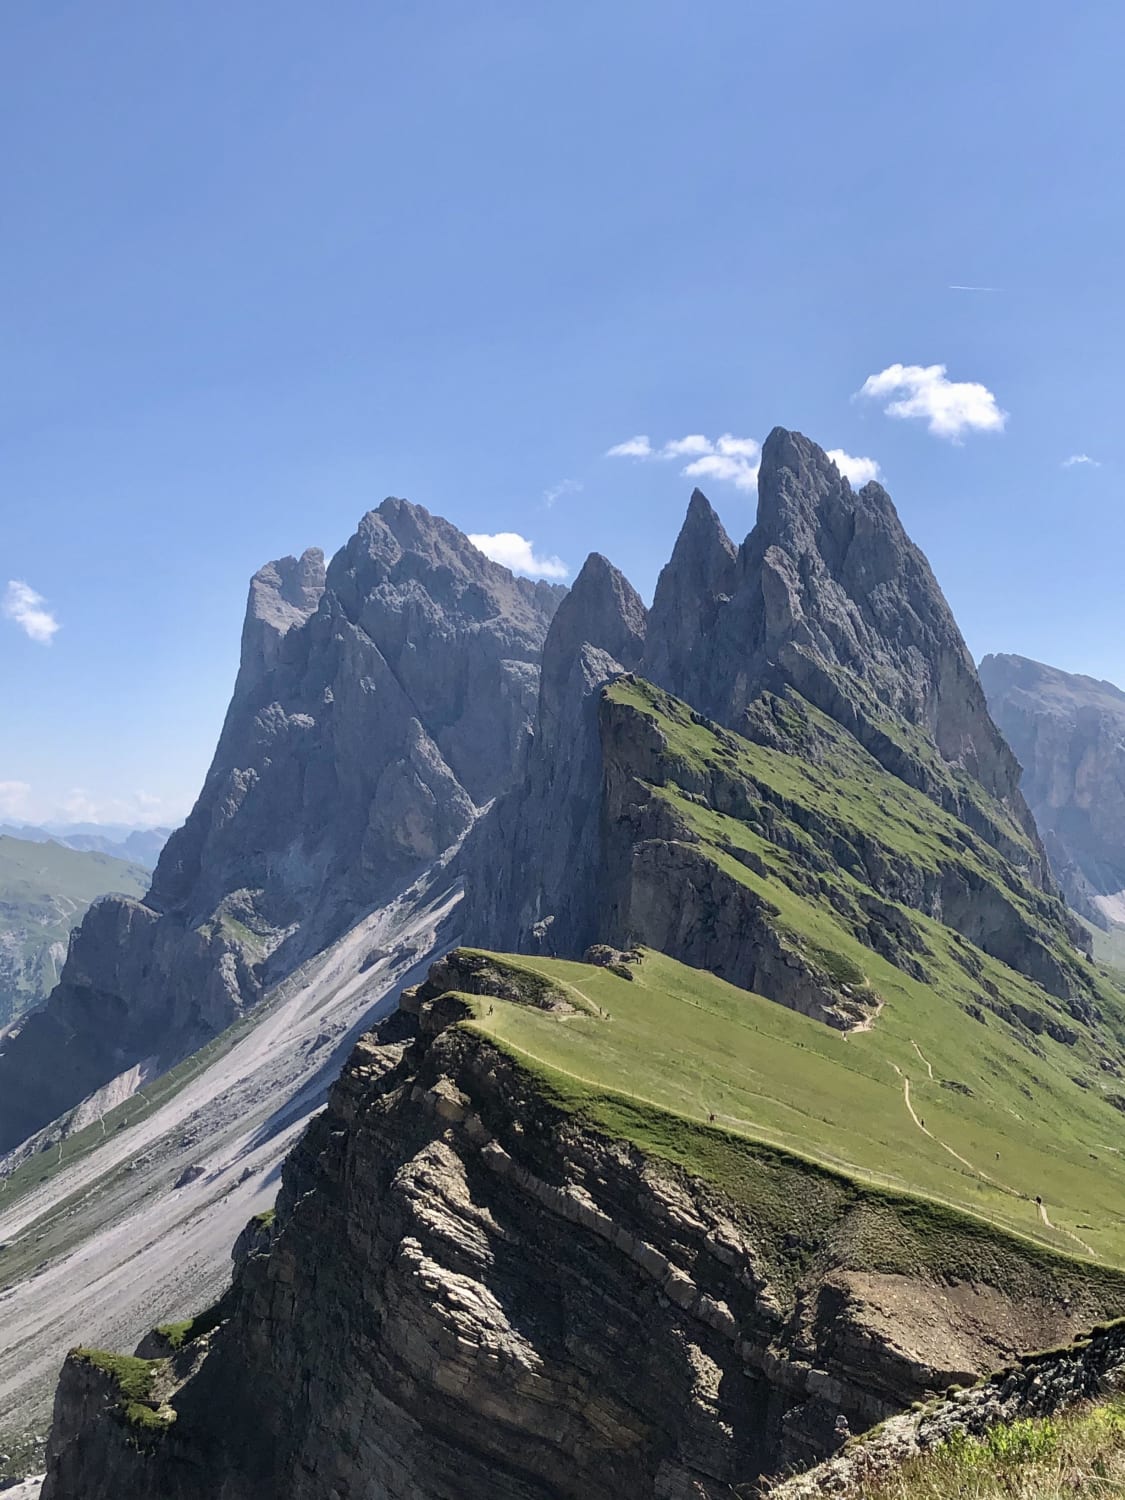 This mountain in the Dolomites